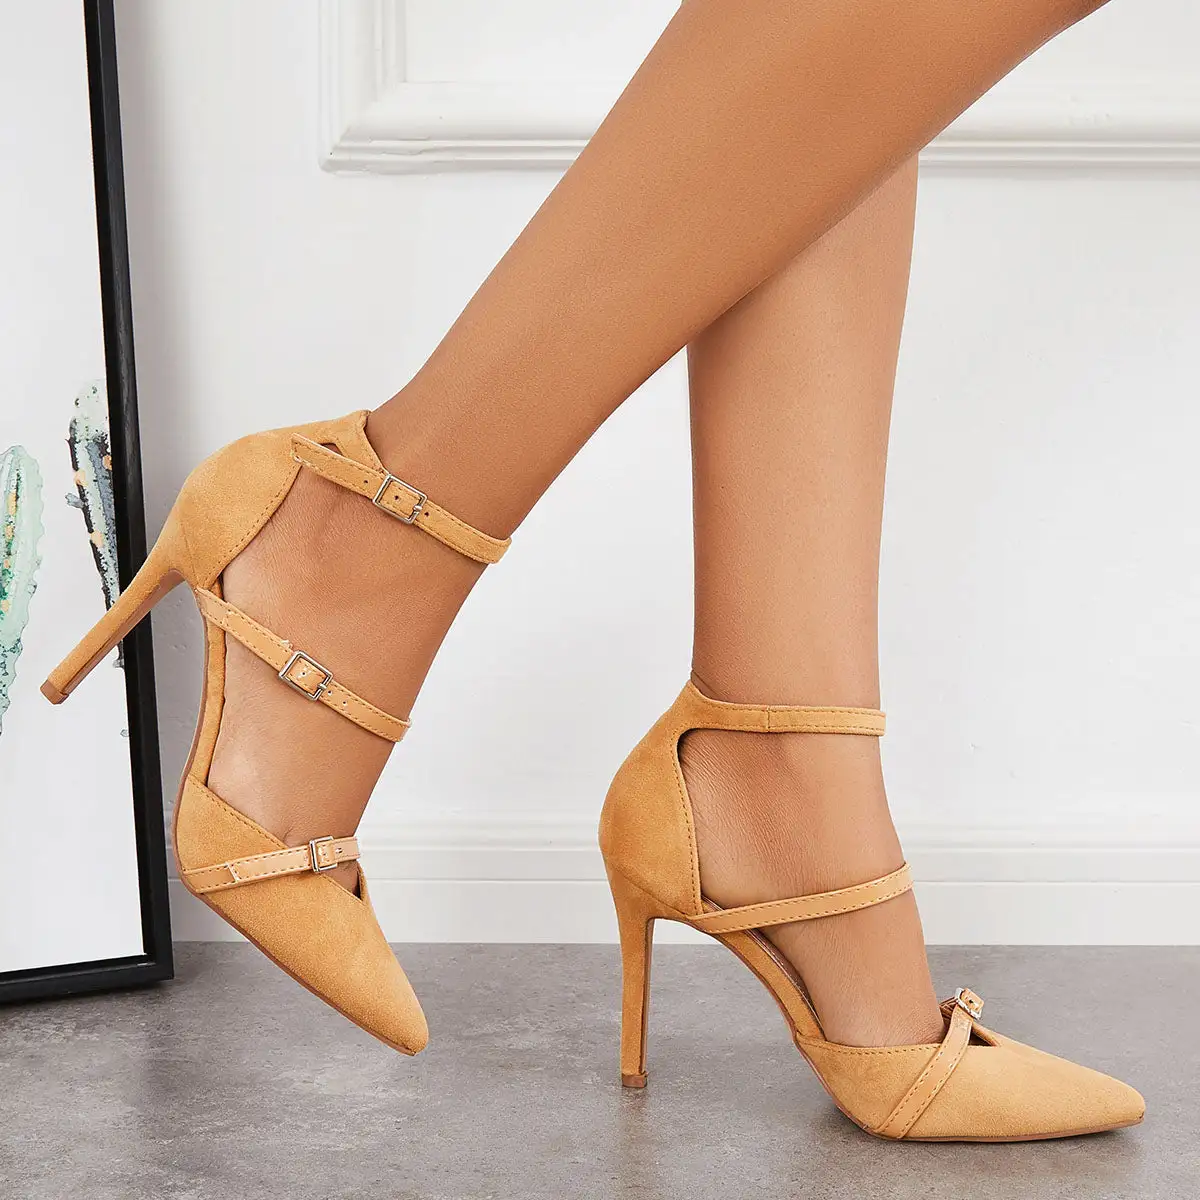 Chic Pointed Toe Stiletto High Heels Ankle Strap Pumps